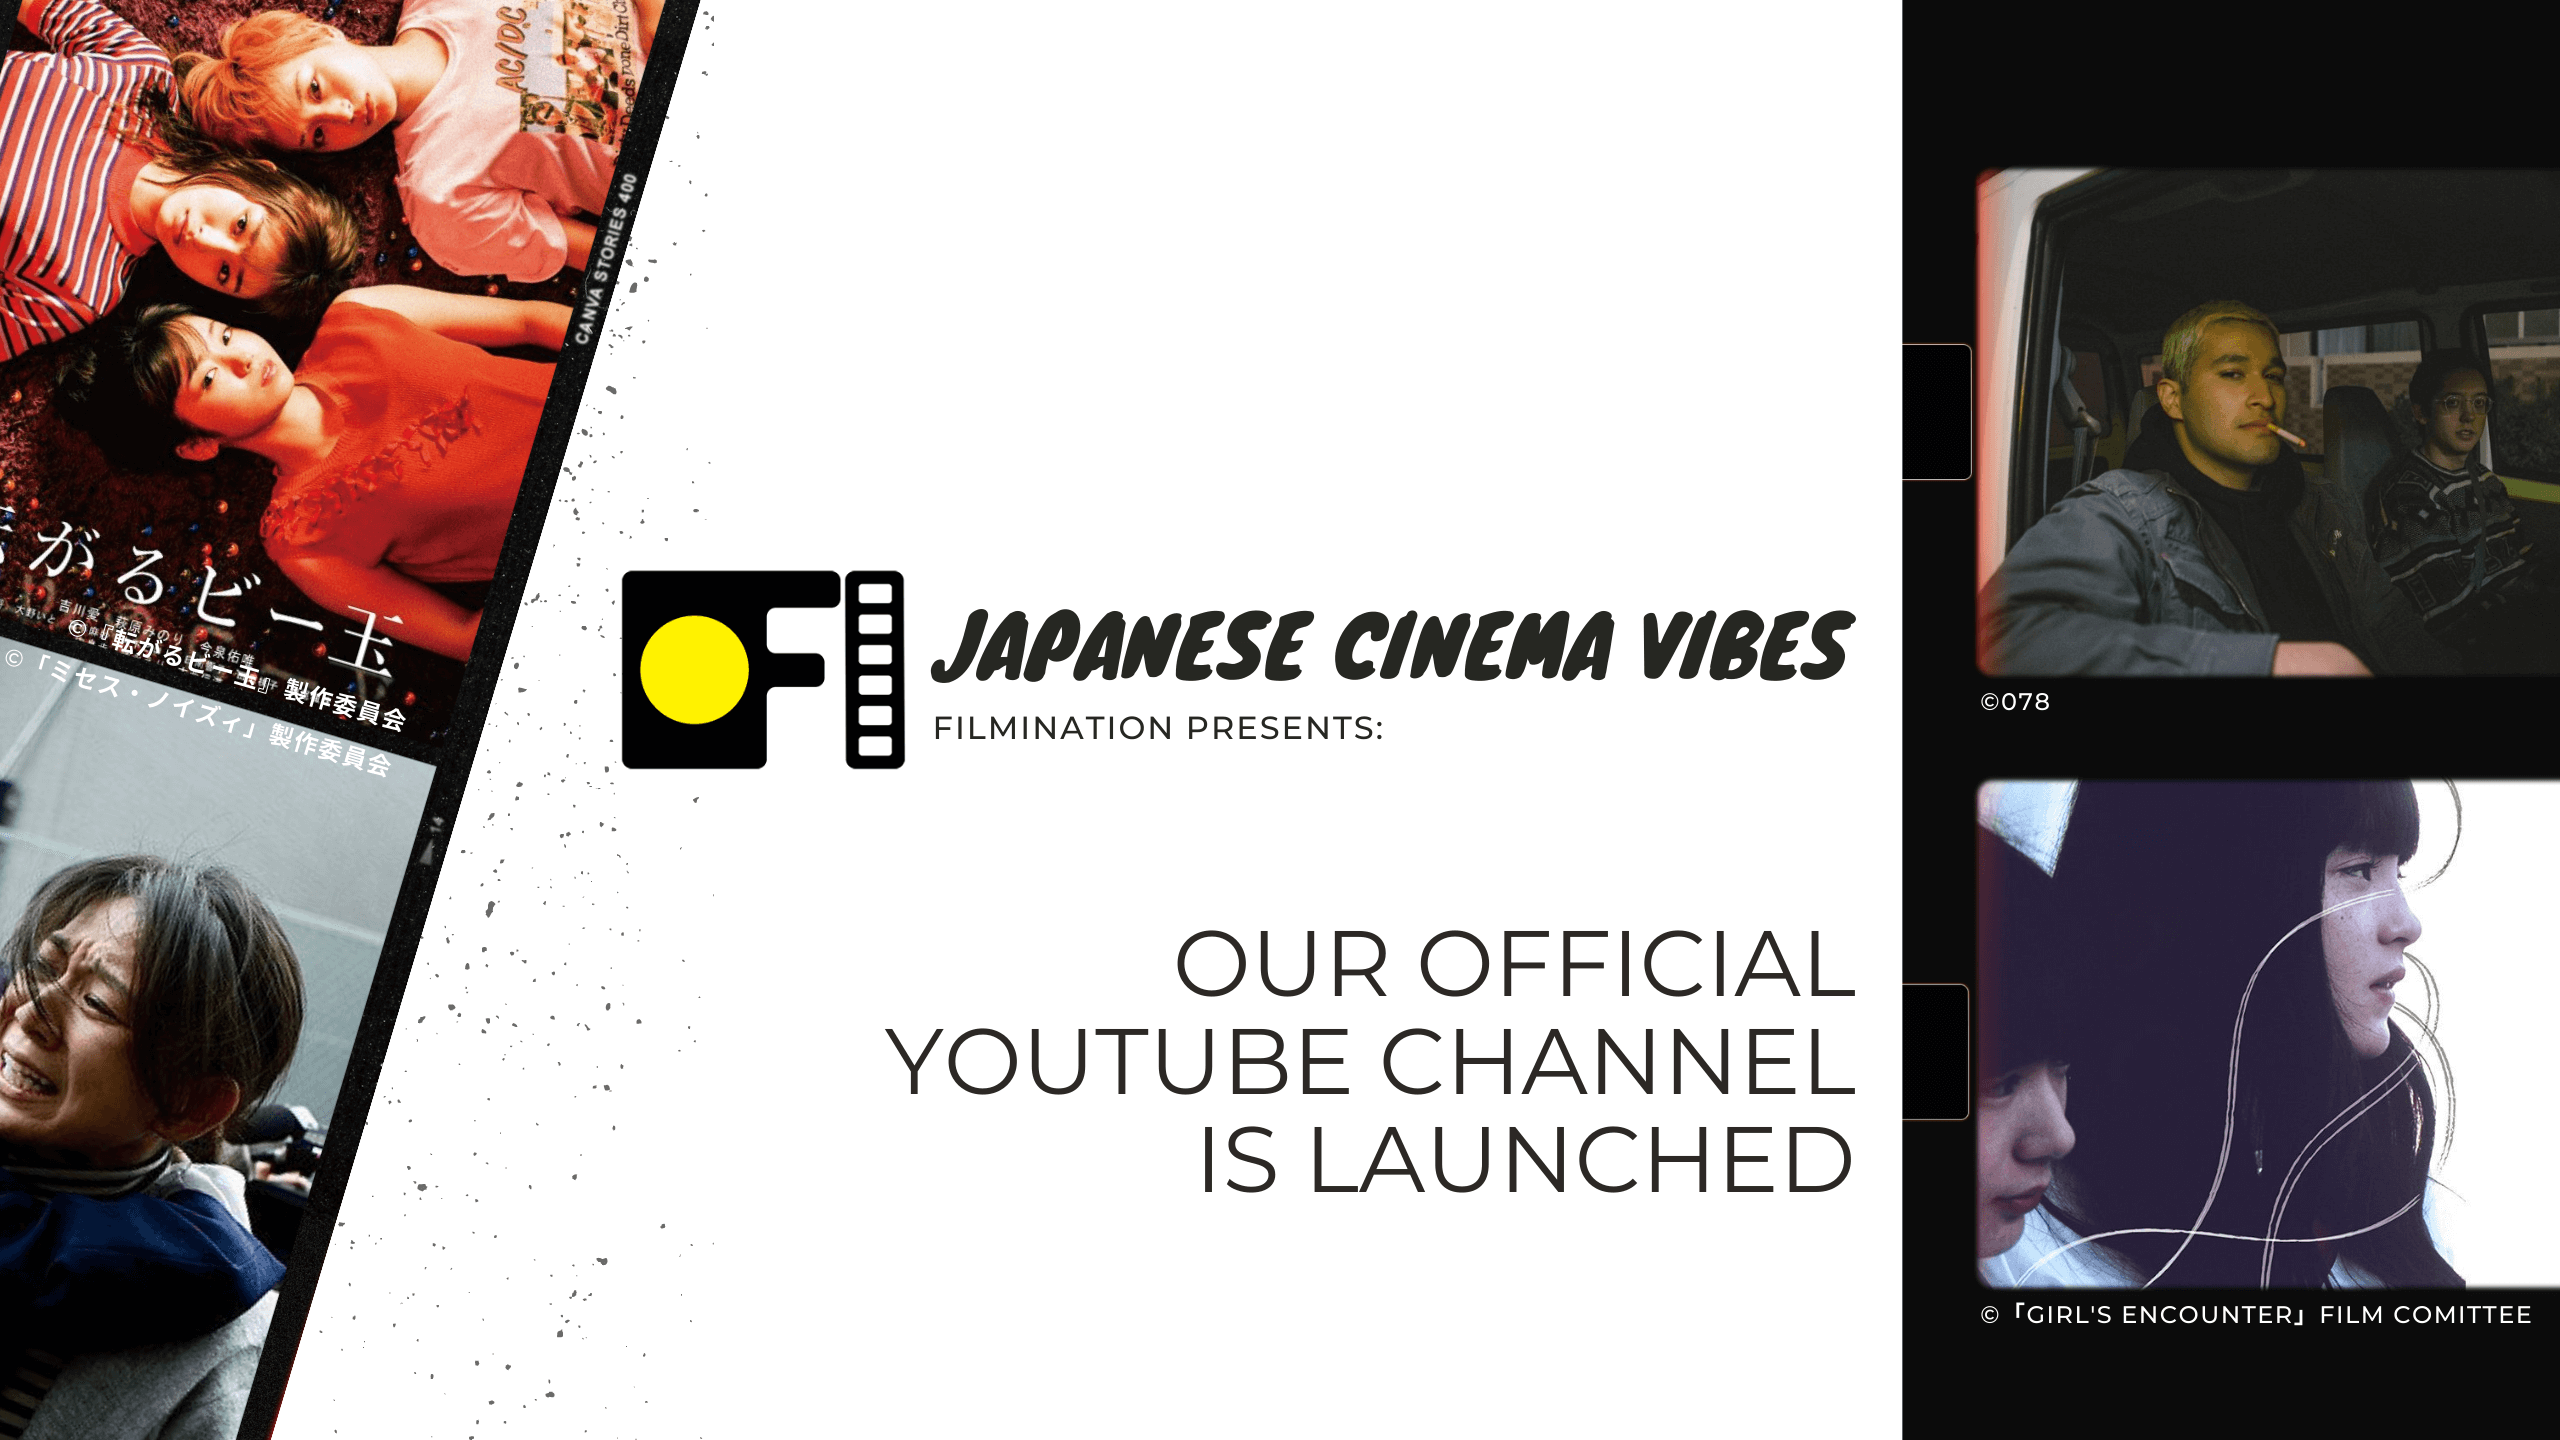 Our Youtube channel Japanese Ciname Vibes is opened!